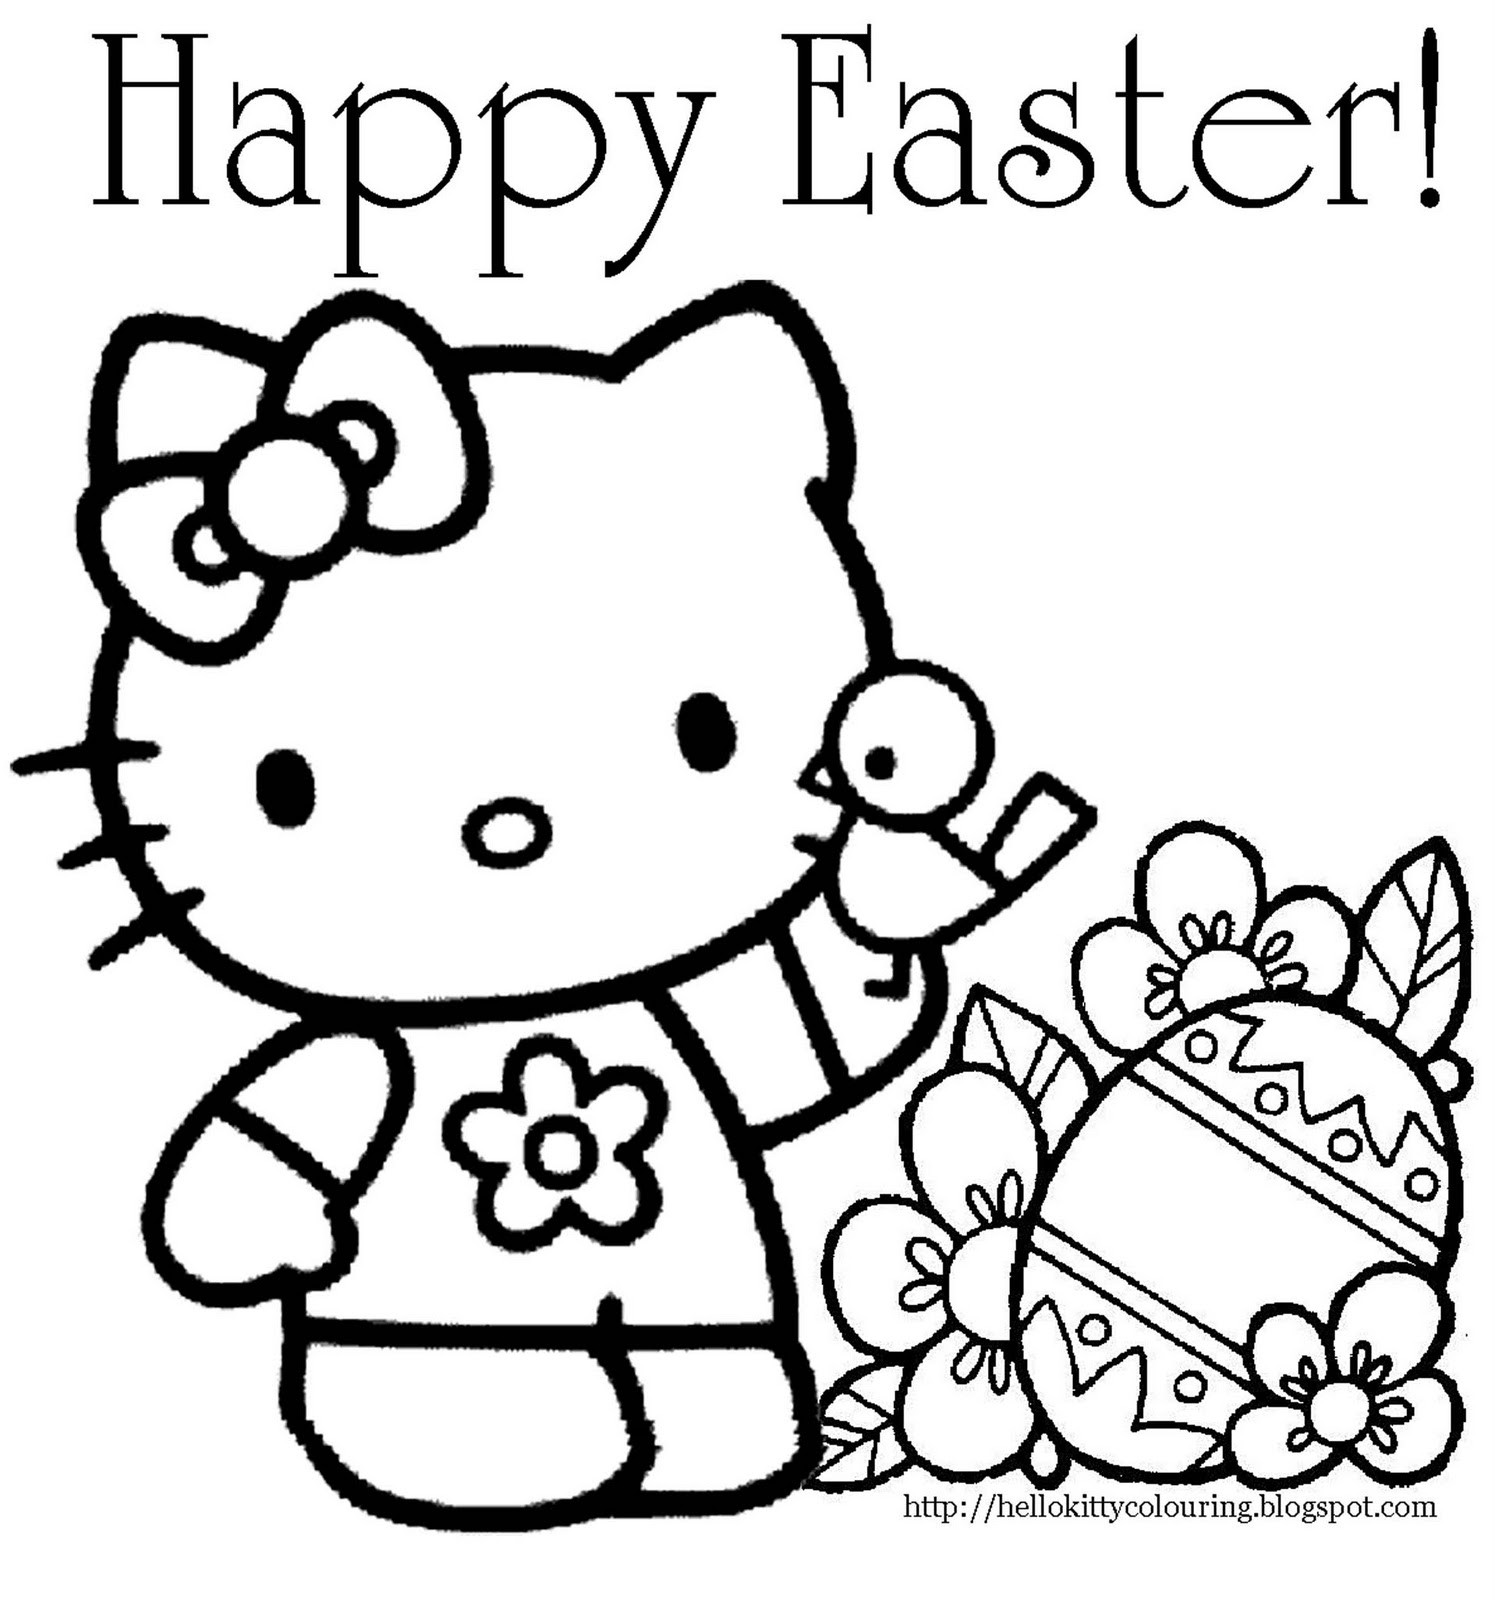 Printable Coloring Pages For Easter
 EASTER COLOURING